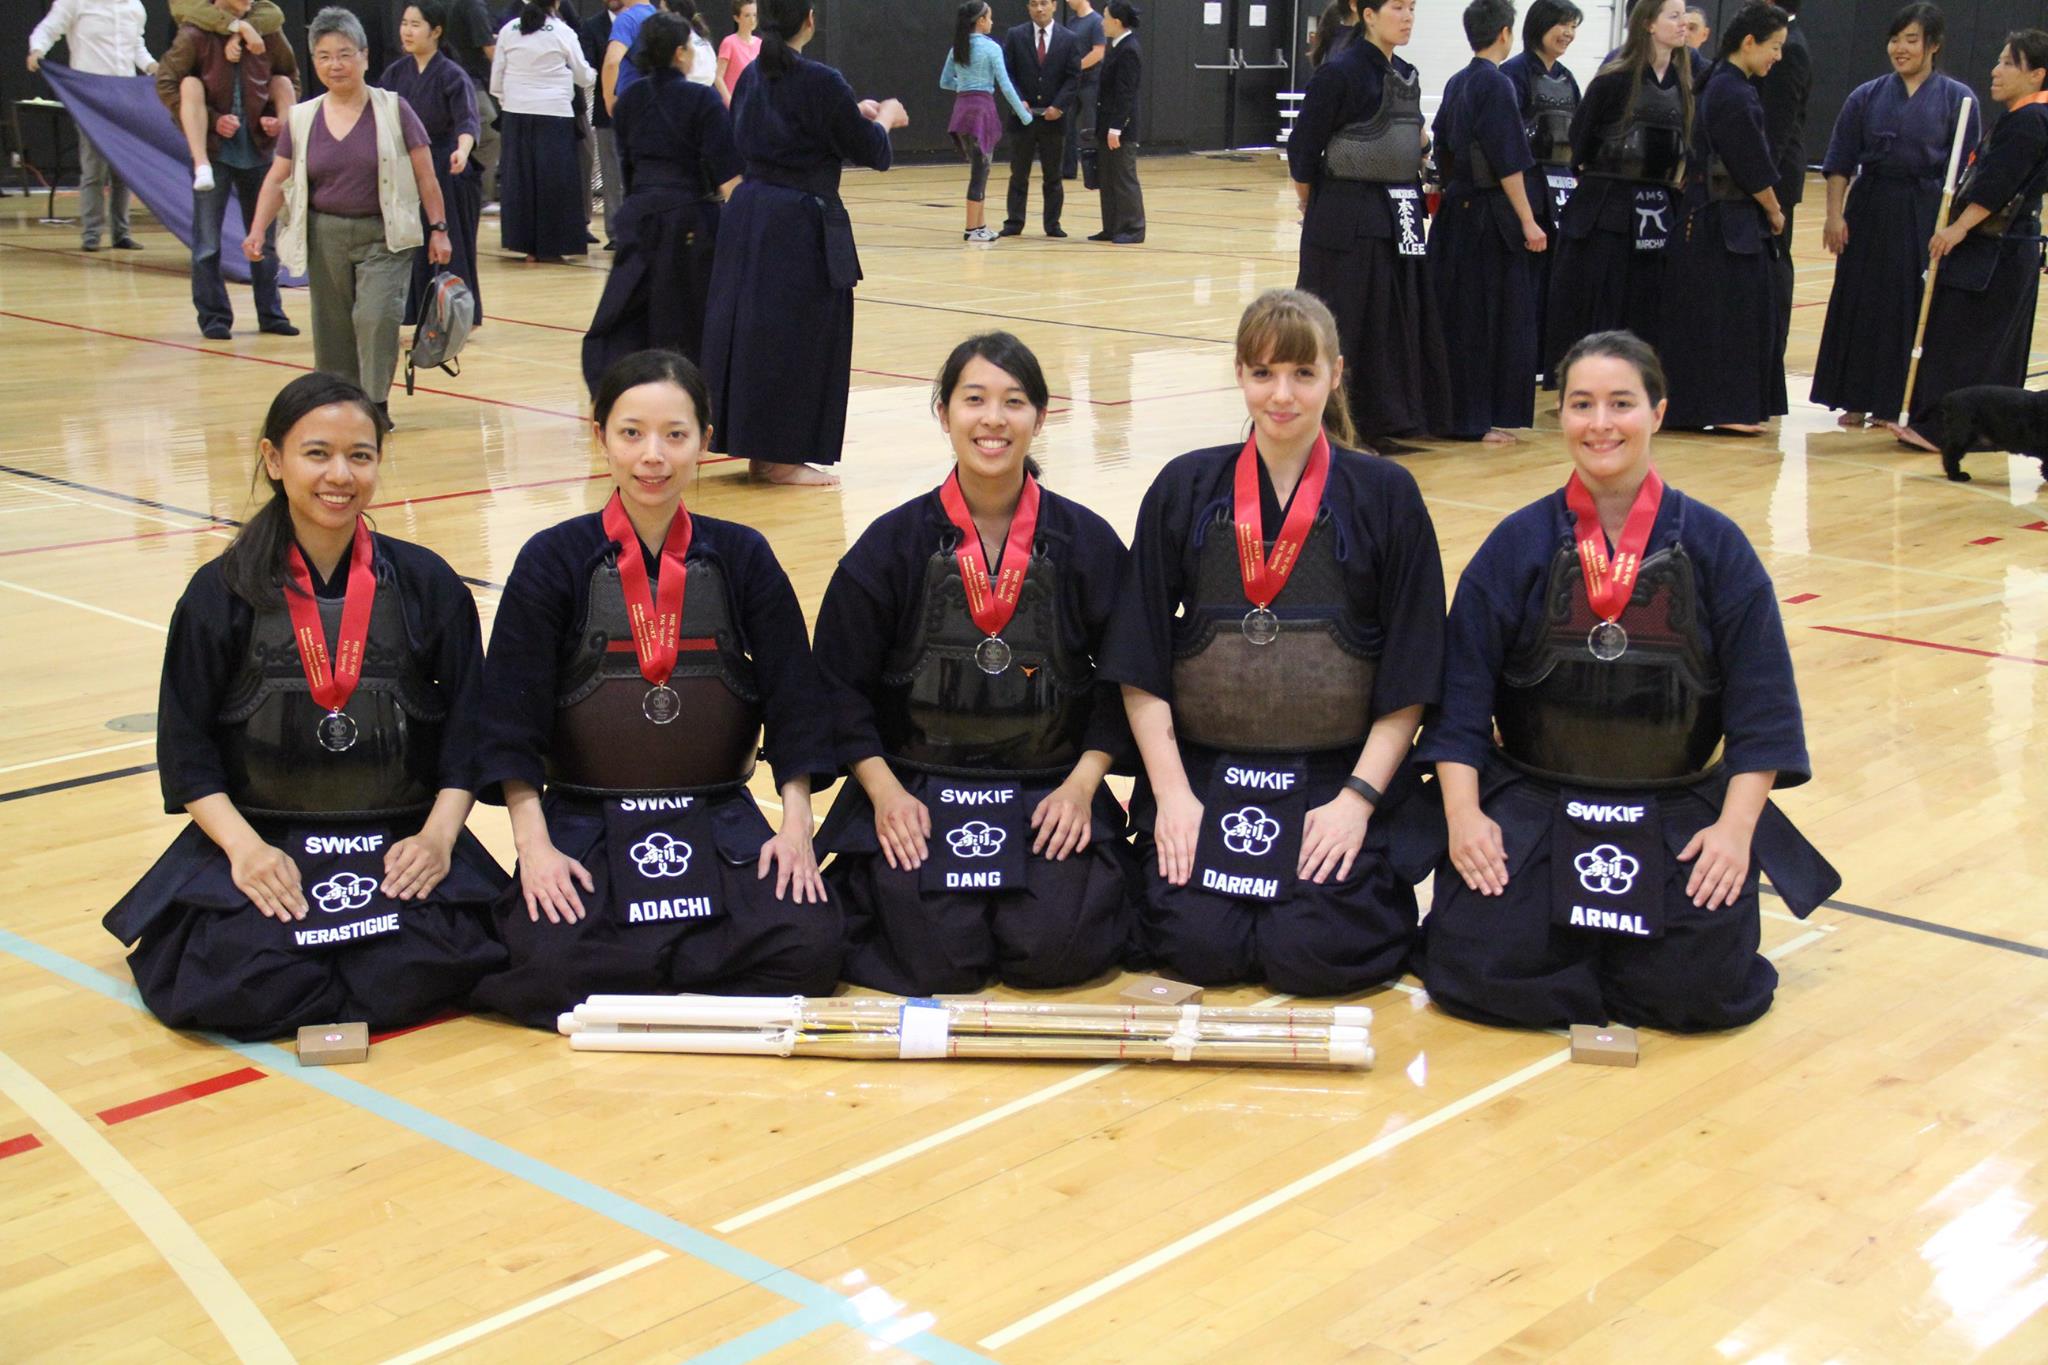  SWKIF Ladies - 2nd place in team division - The 6th PNKF North American Women's Kendo Taikai - Seattle, WA 